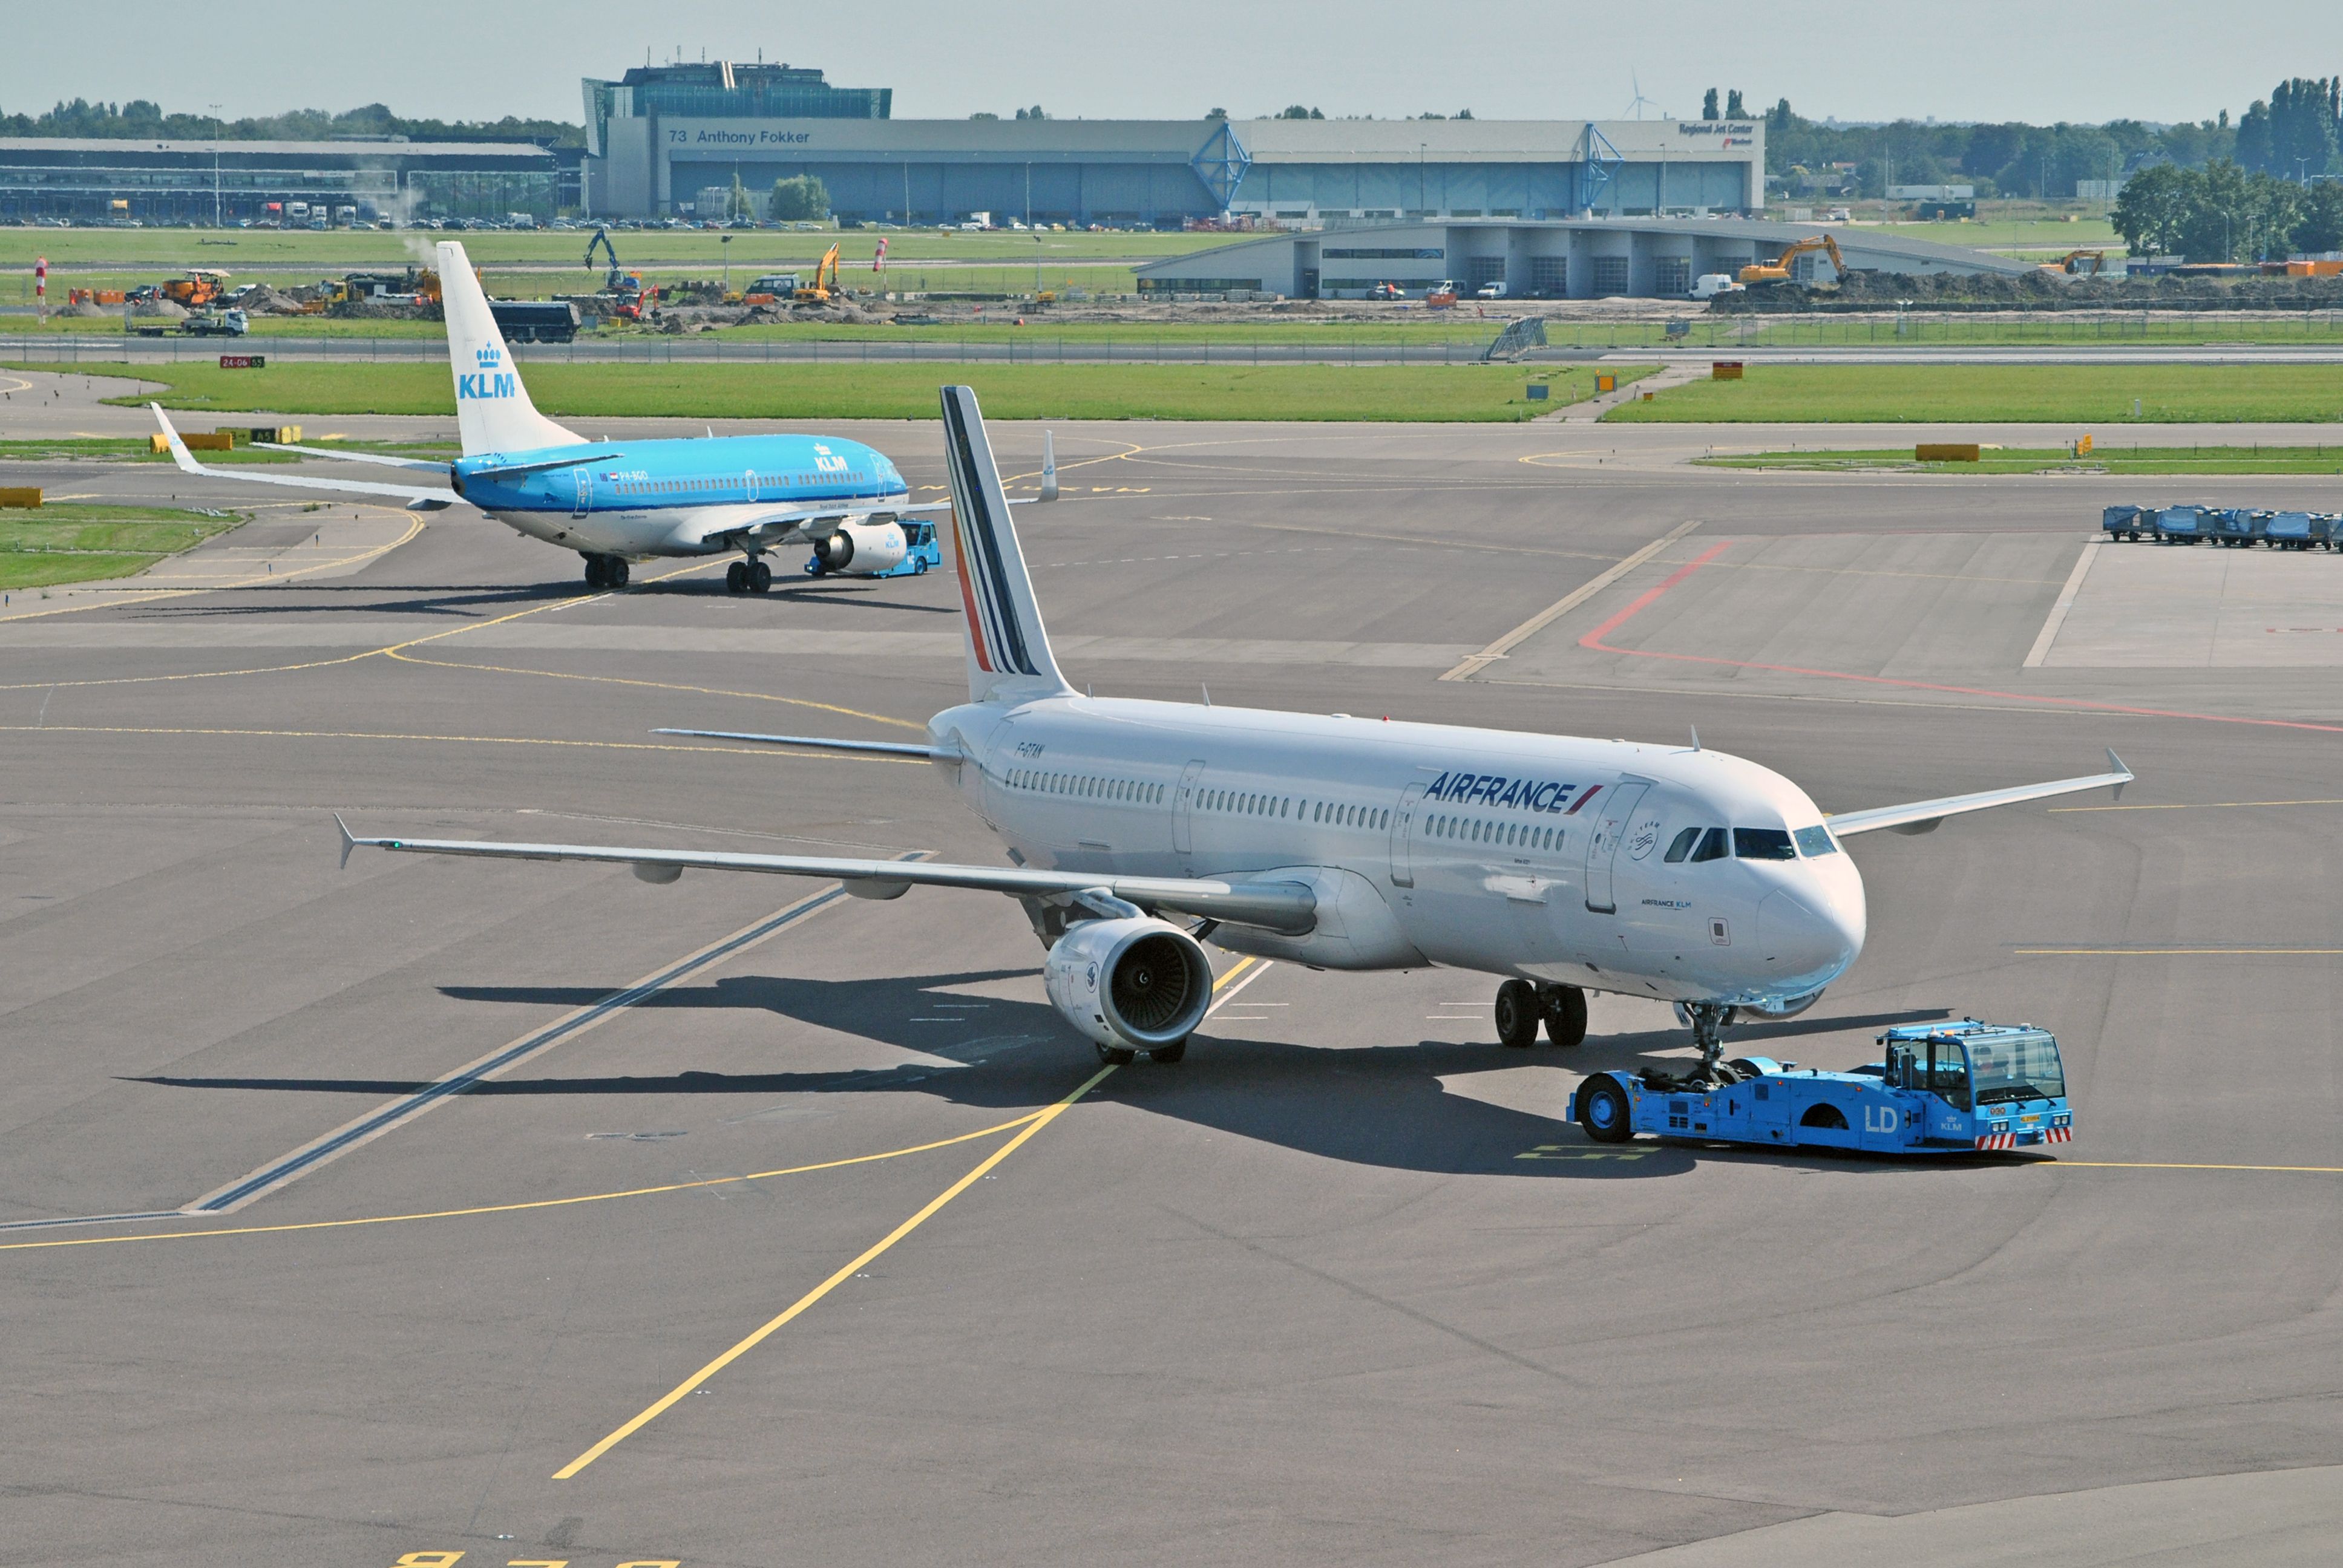 An Air France plane taxiing in front of a KLM aircraft in Amsterdam 